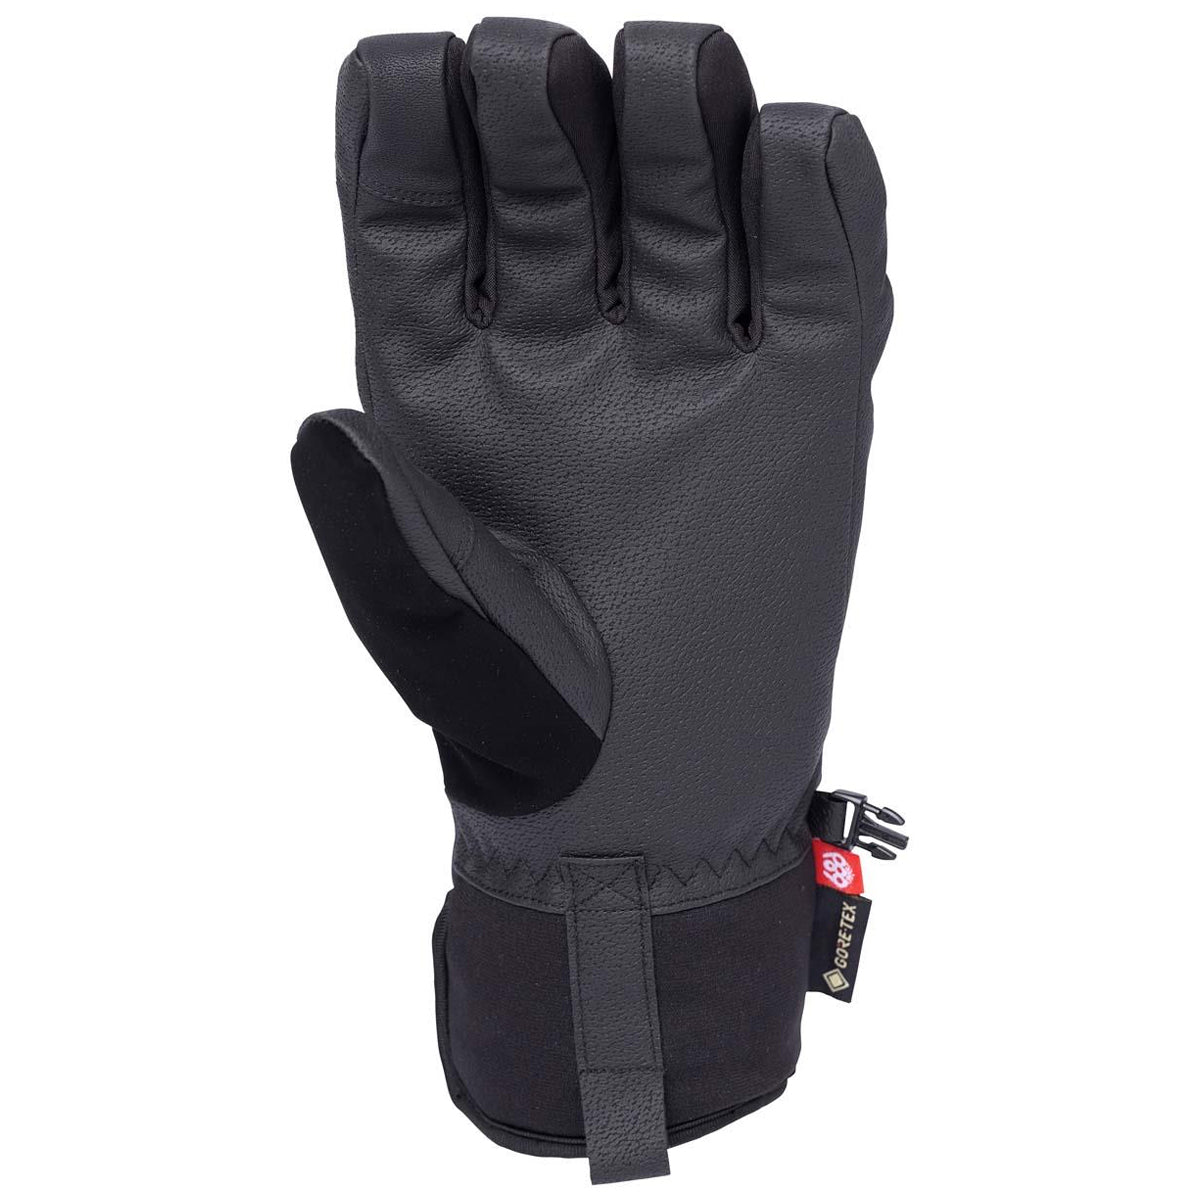 686 Gore Linear Under Cuff Snowboard Gloves - Charcoal image 2